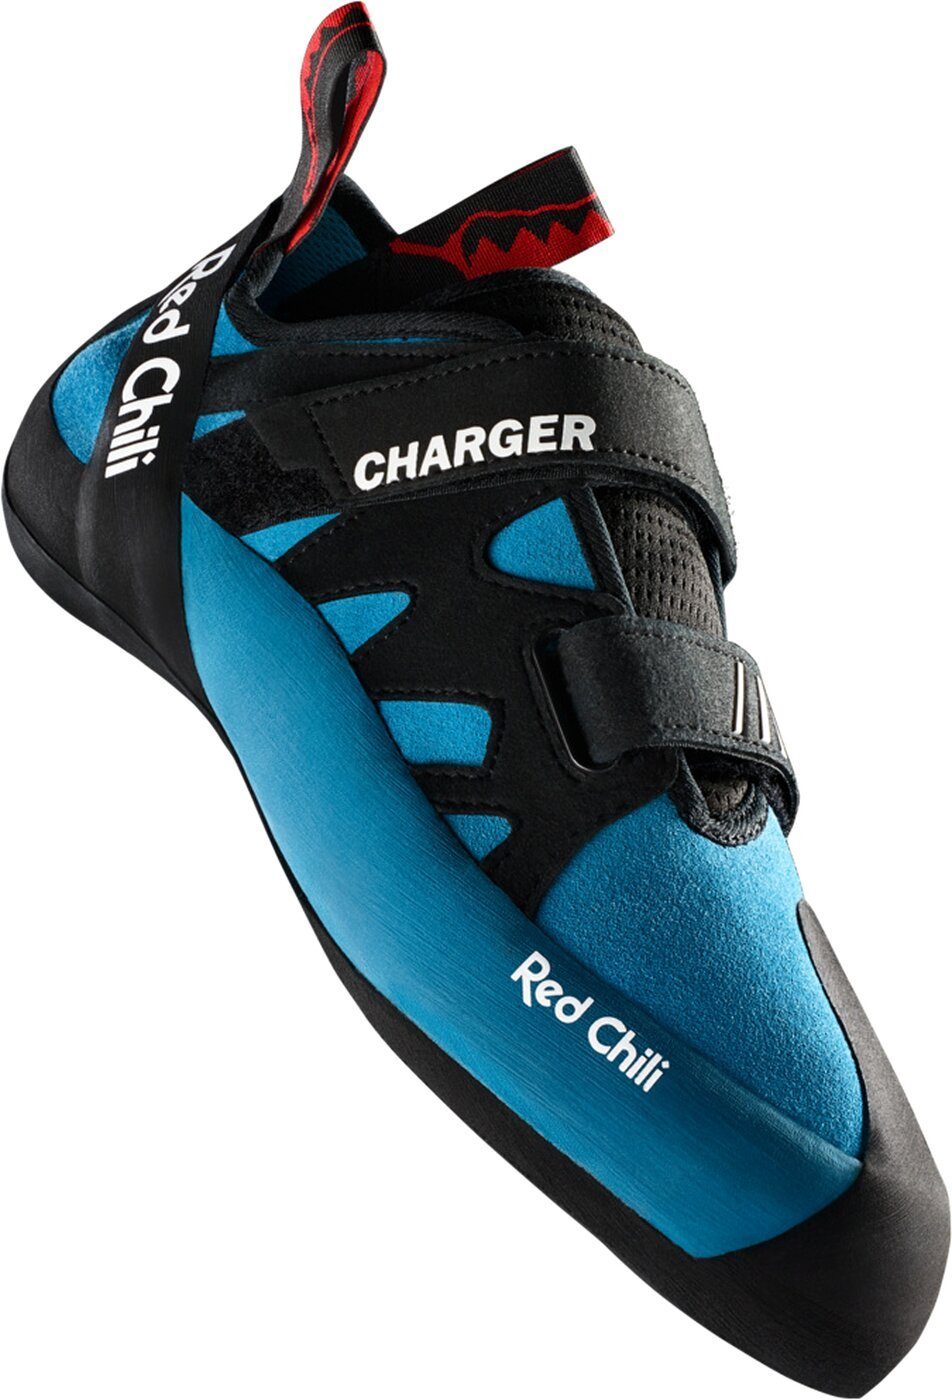 Chili Charger Red INKBLUE Kletterschuh